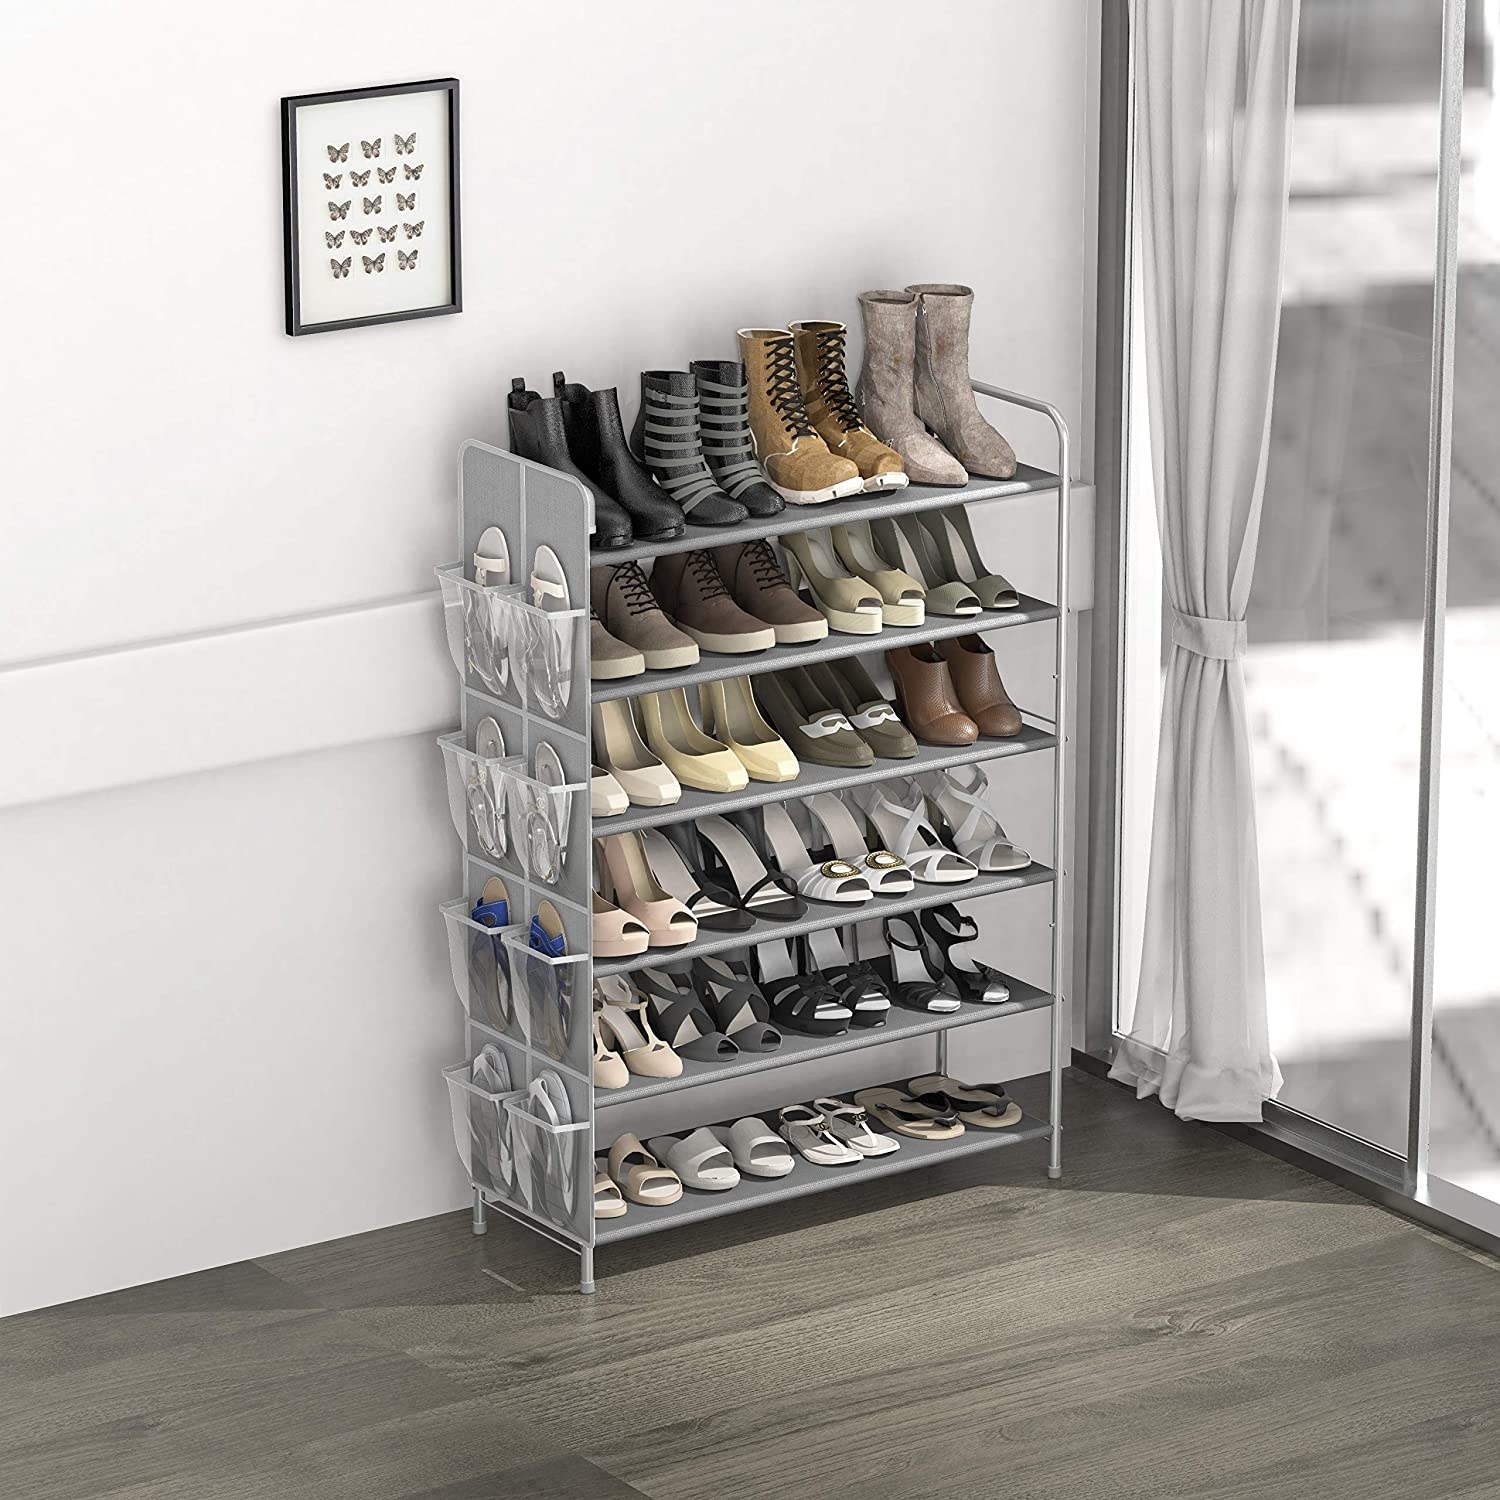 A shoe rack with six tiers and filled with shoes